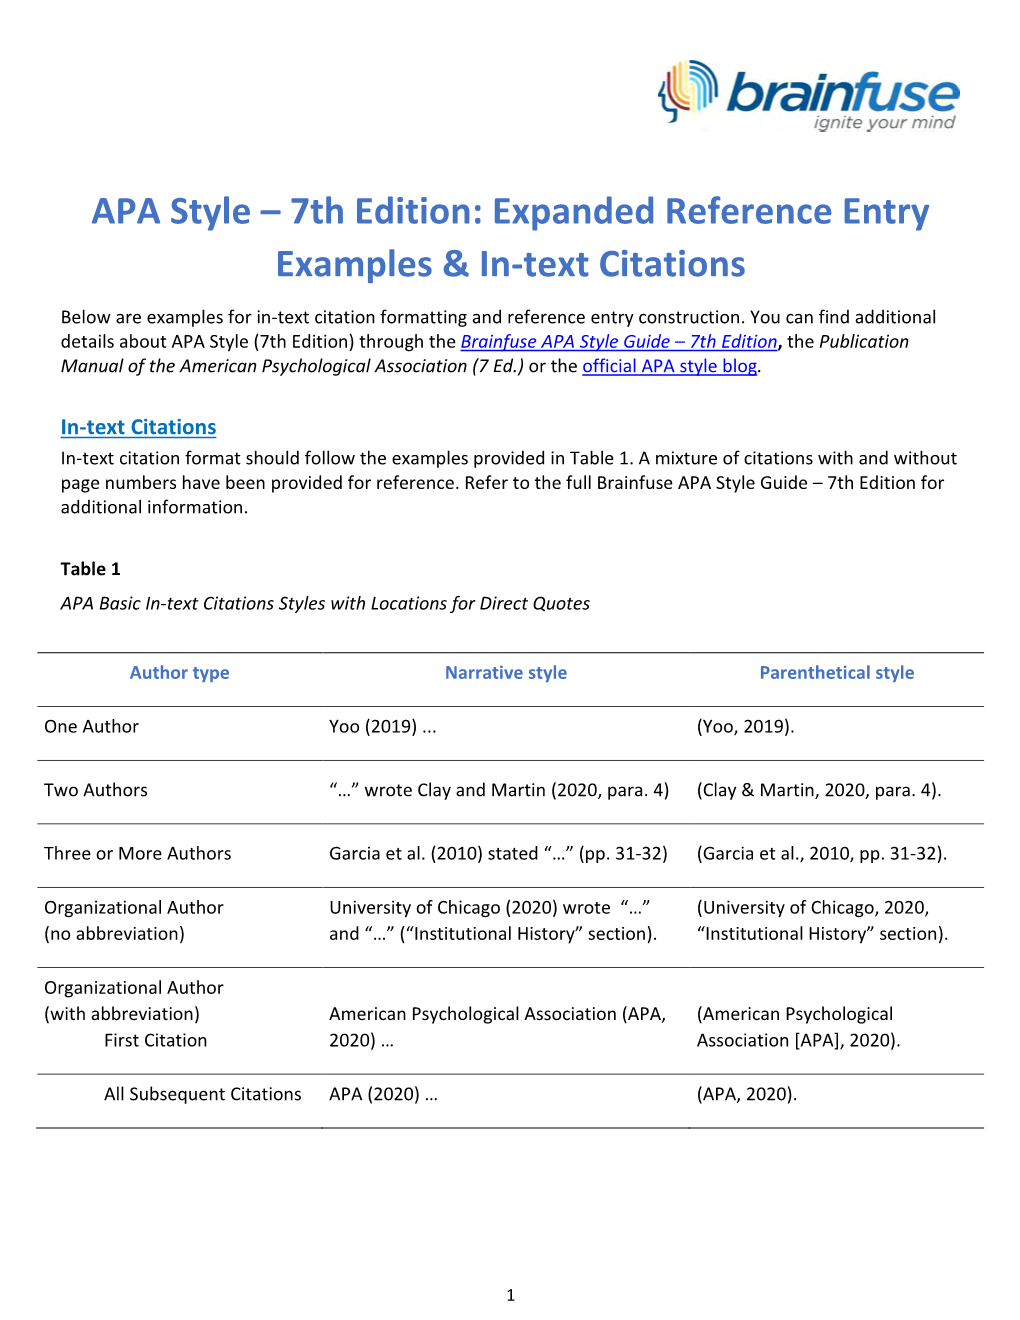 APA 7Th Edition – Expanded Reference Entry Examples